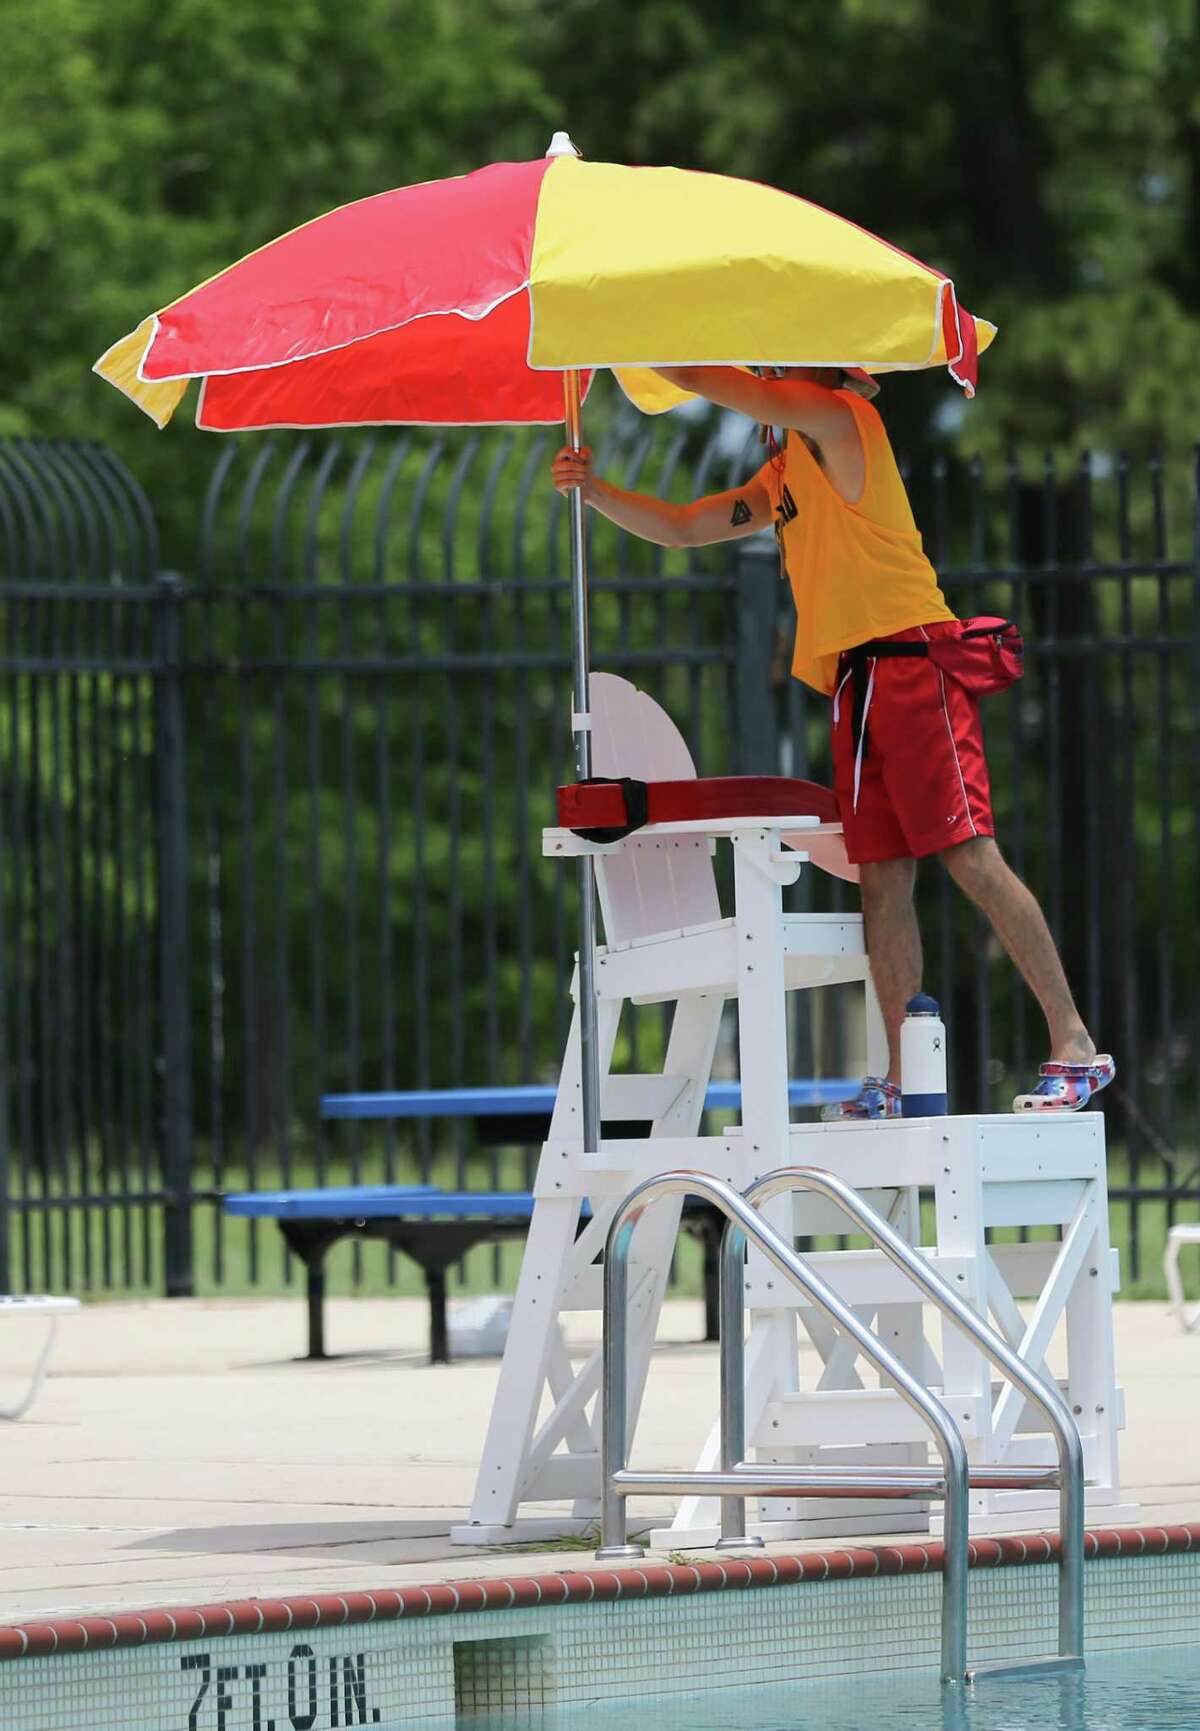 Nico Garza, 20, sets up his lifeguard stand at the Mason Park swim pool on Tuesday, June 7, 2022 in Houston. Garza has been lifeguarding with Houston for four years.